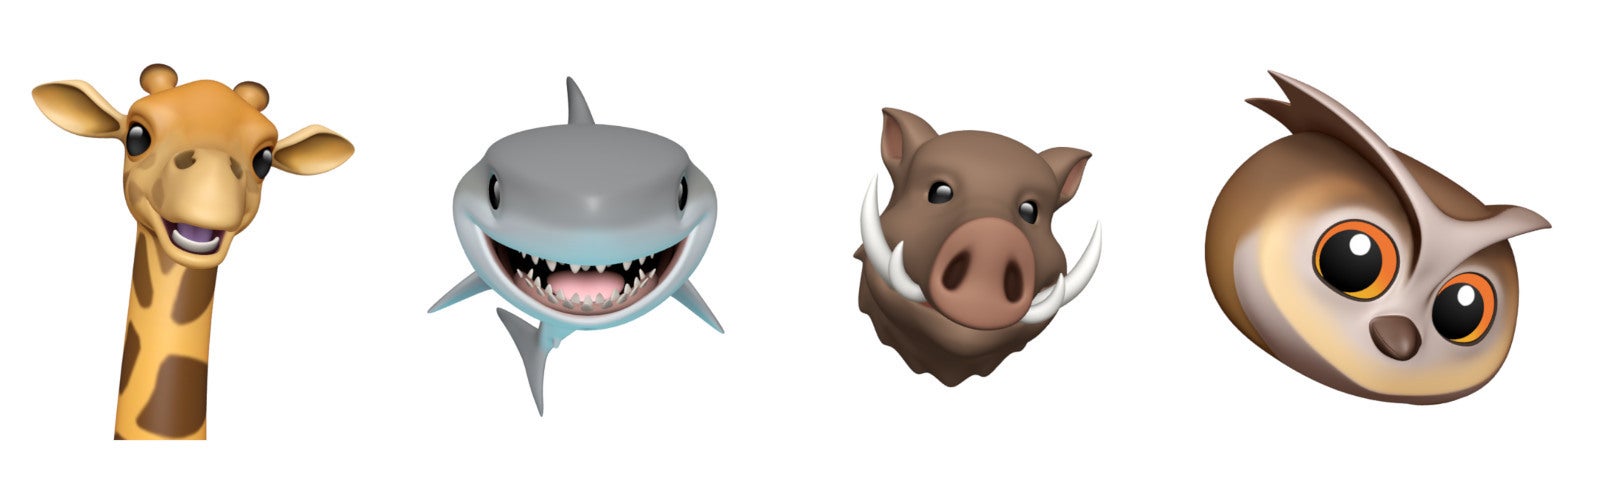 iOS 12.2 is here: Apple News+, new Animoji, and more